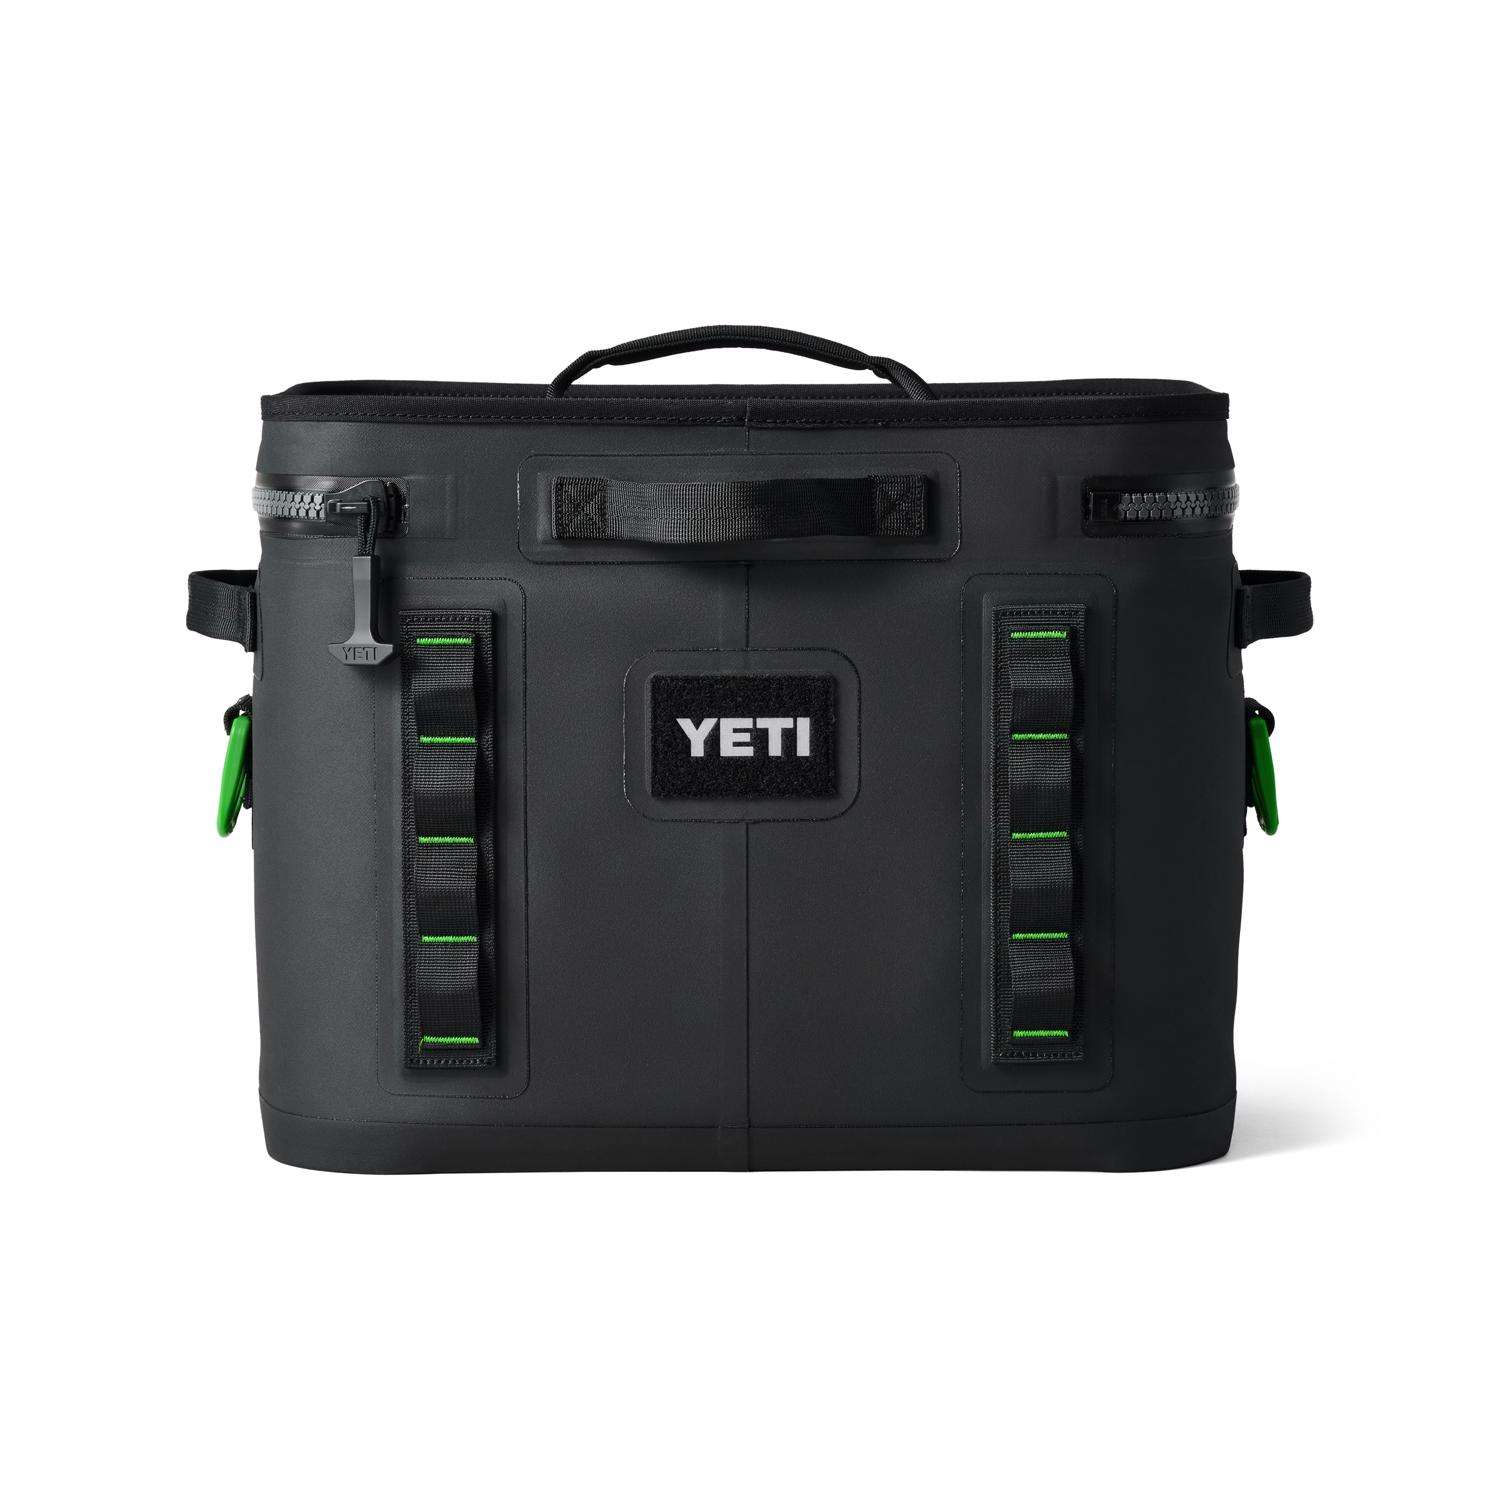 YETI Hopper Flip 18 Insulated Personal Cooler, Harvest Red at